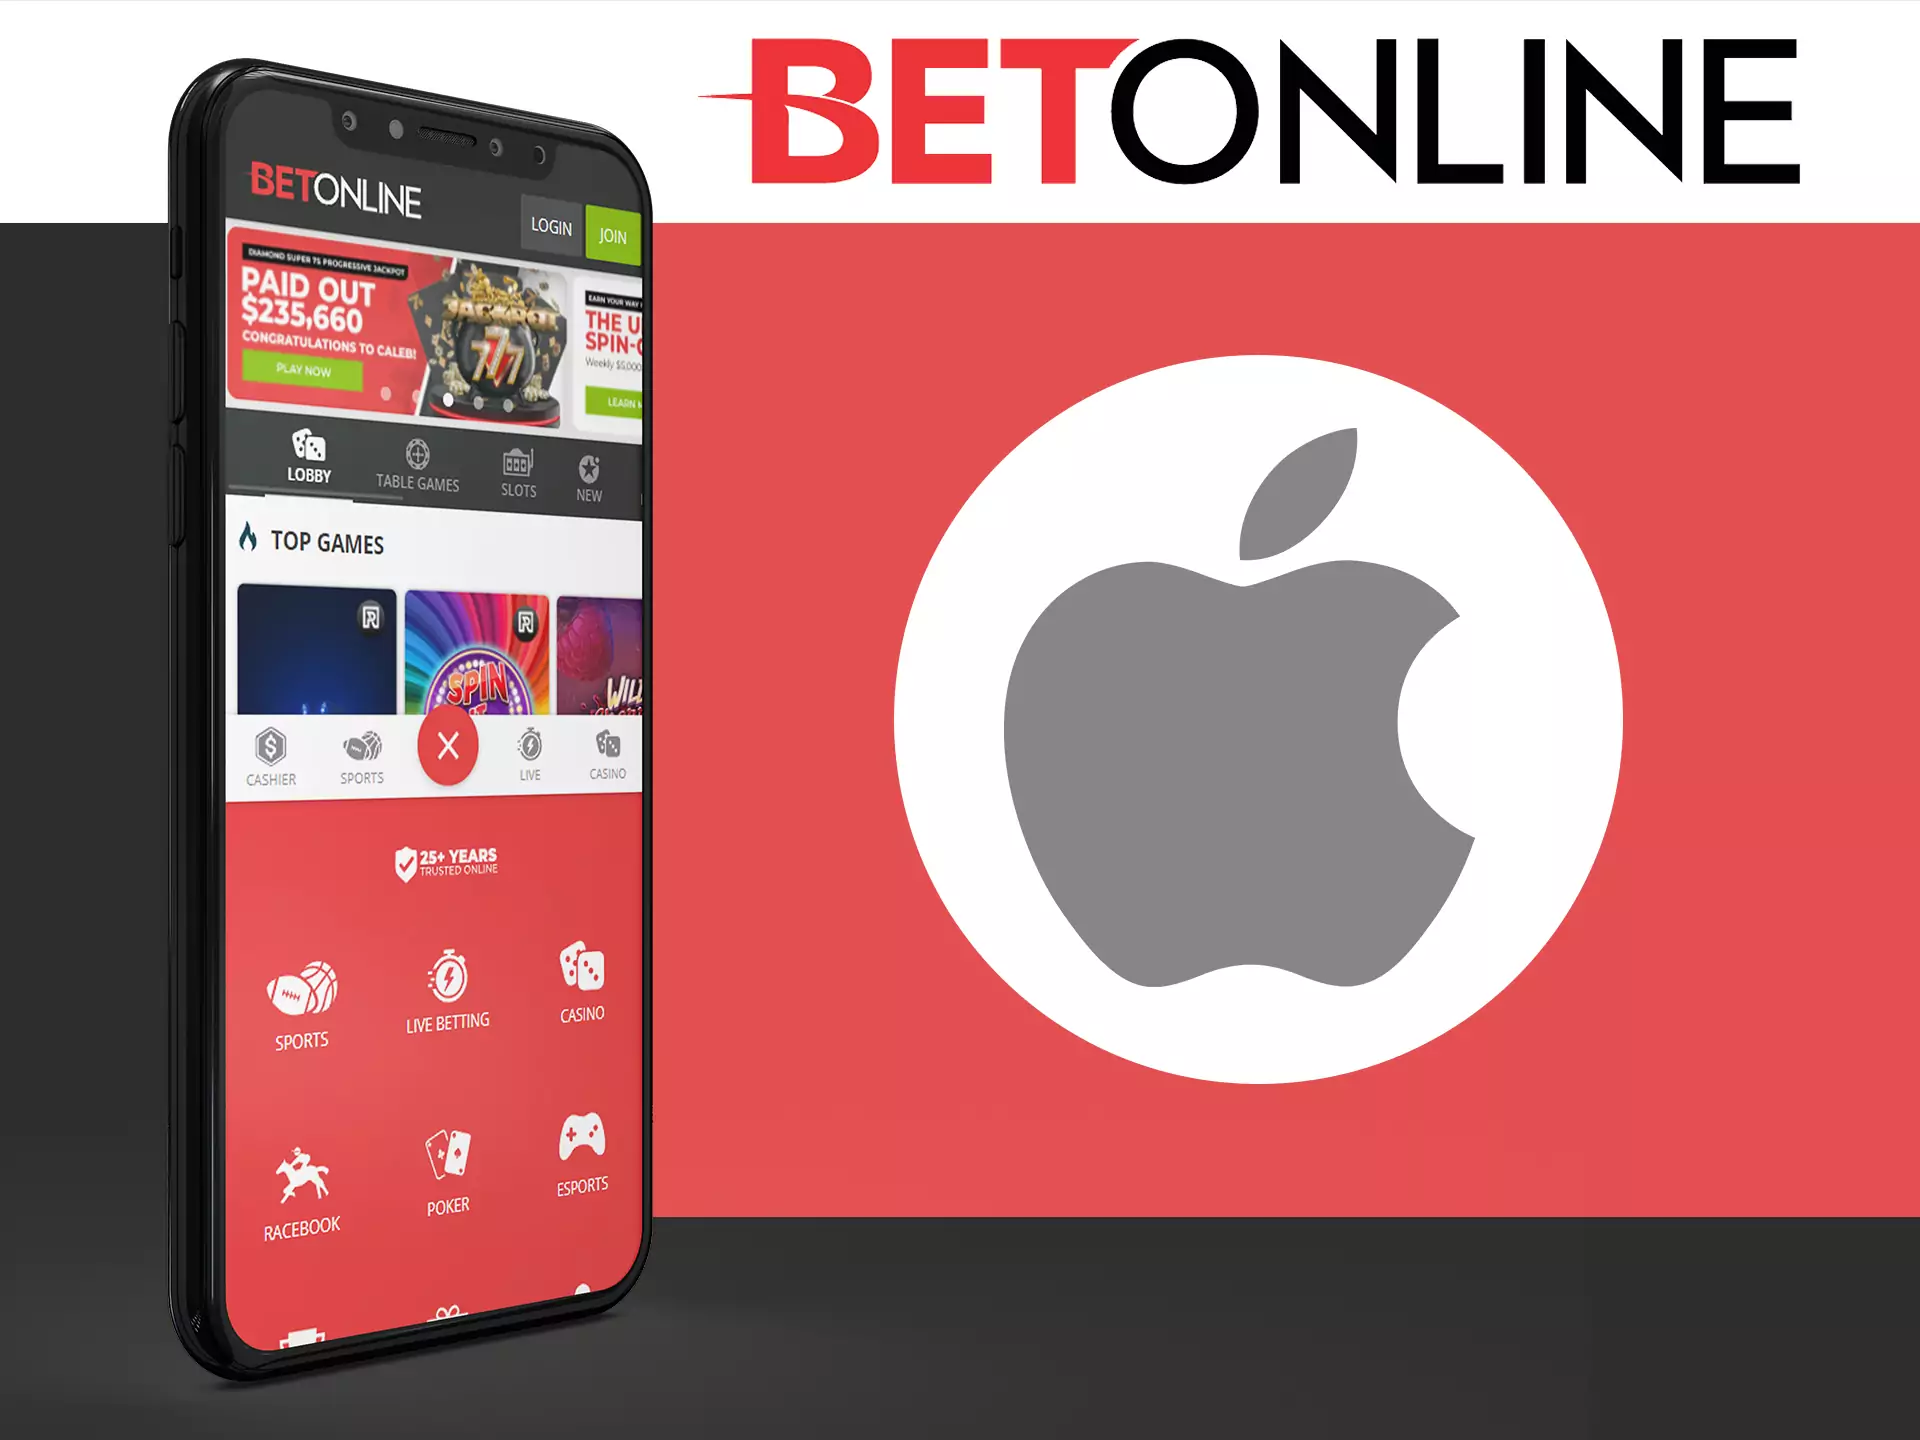 The Betonline app supports most iOS smartphones.